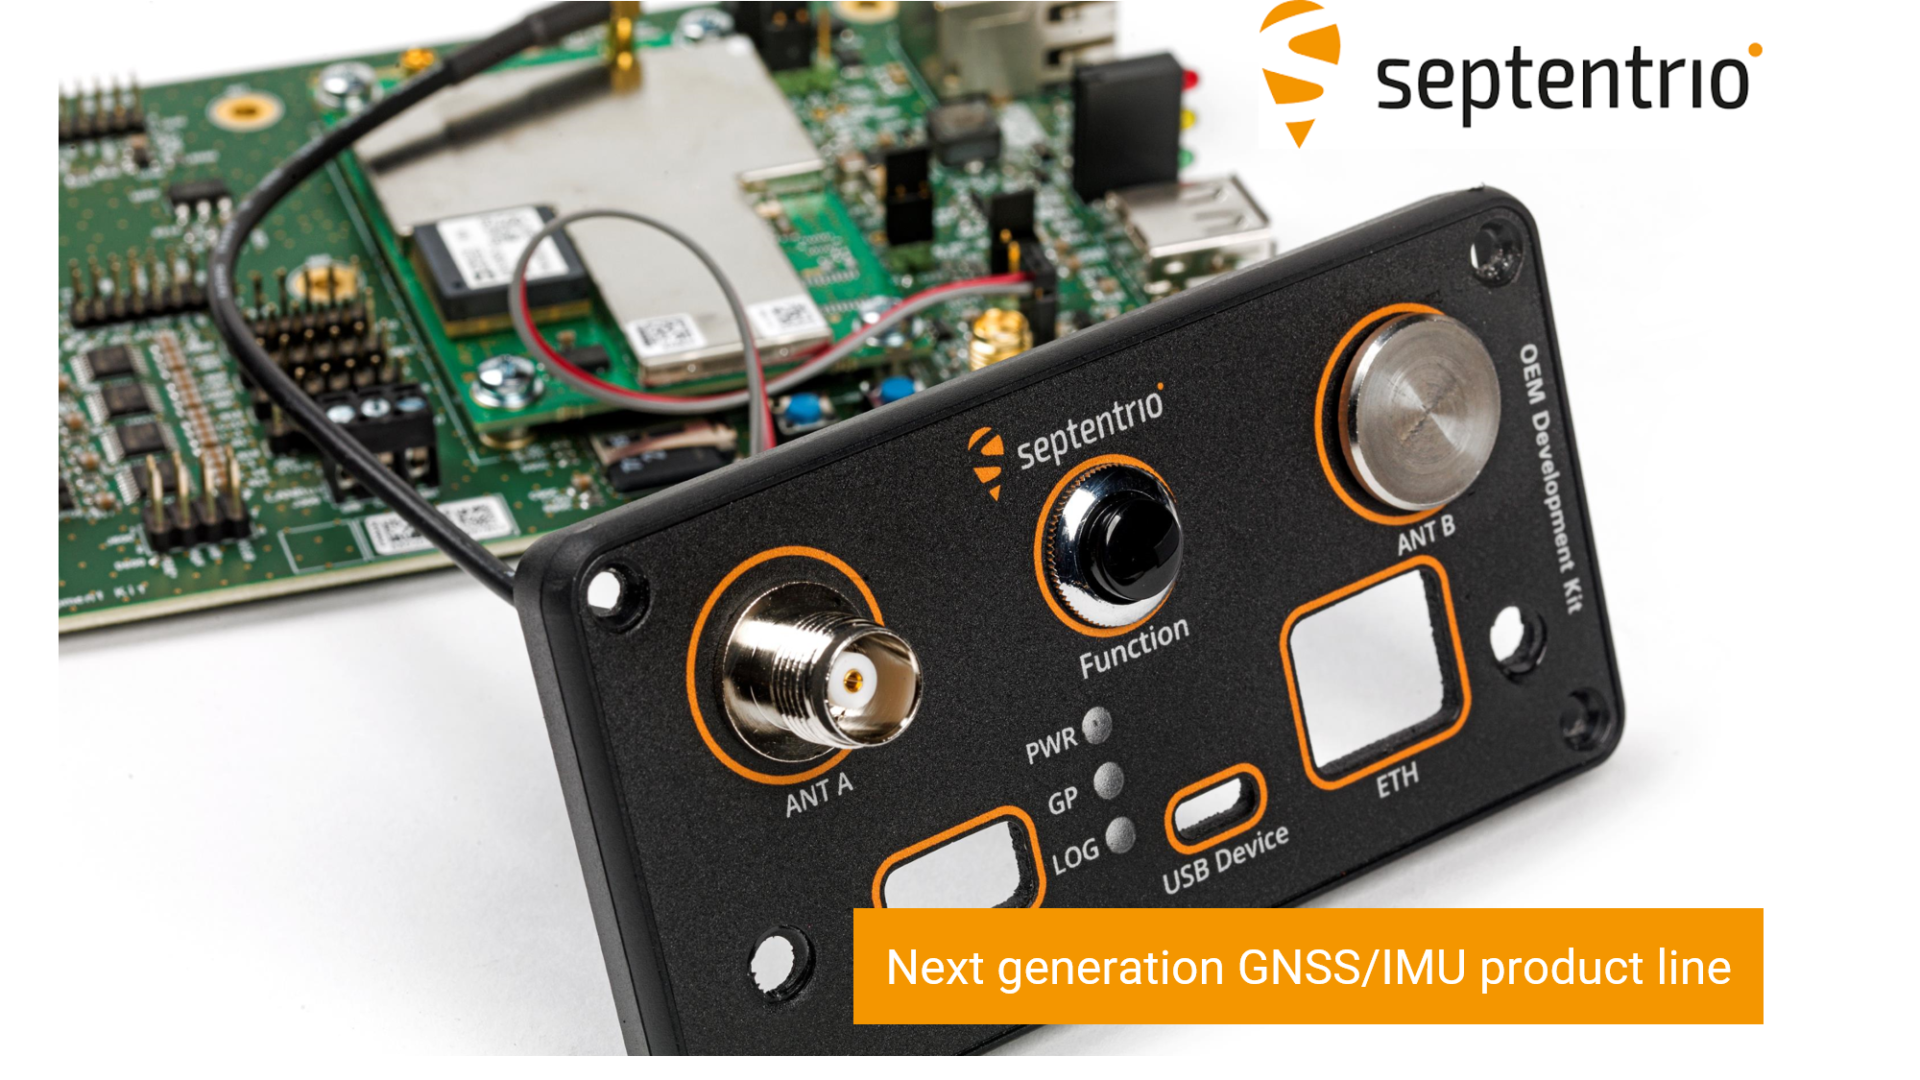 Septentrio launched its next generation GNSS/INS product line